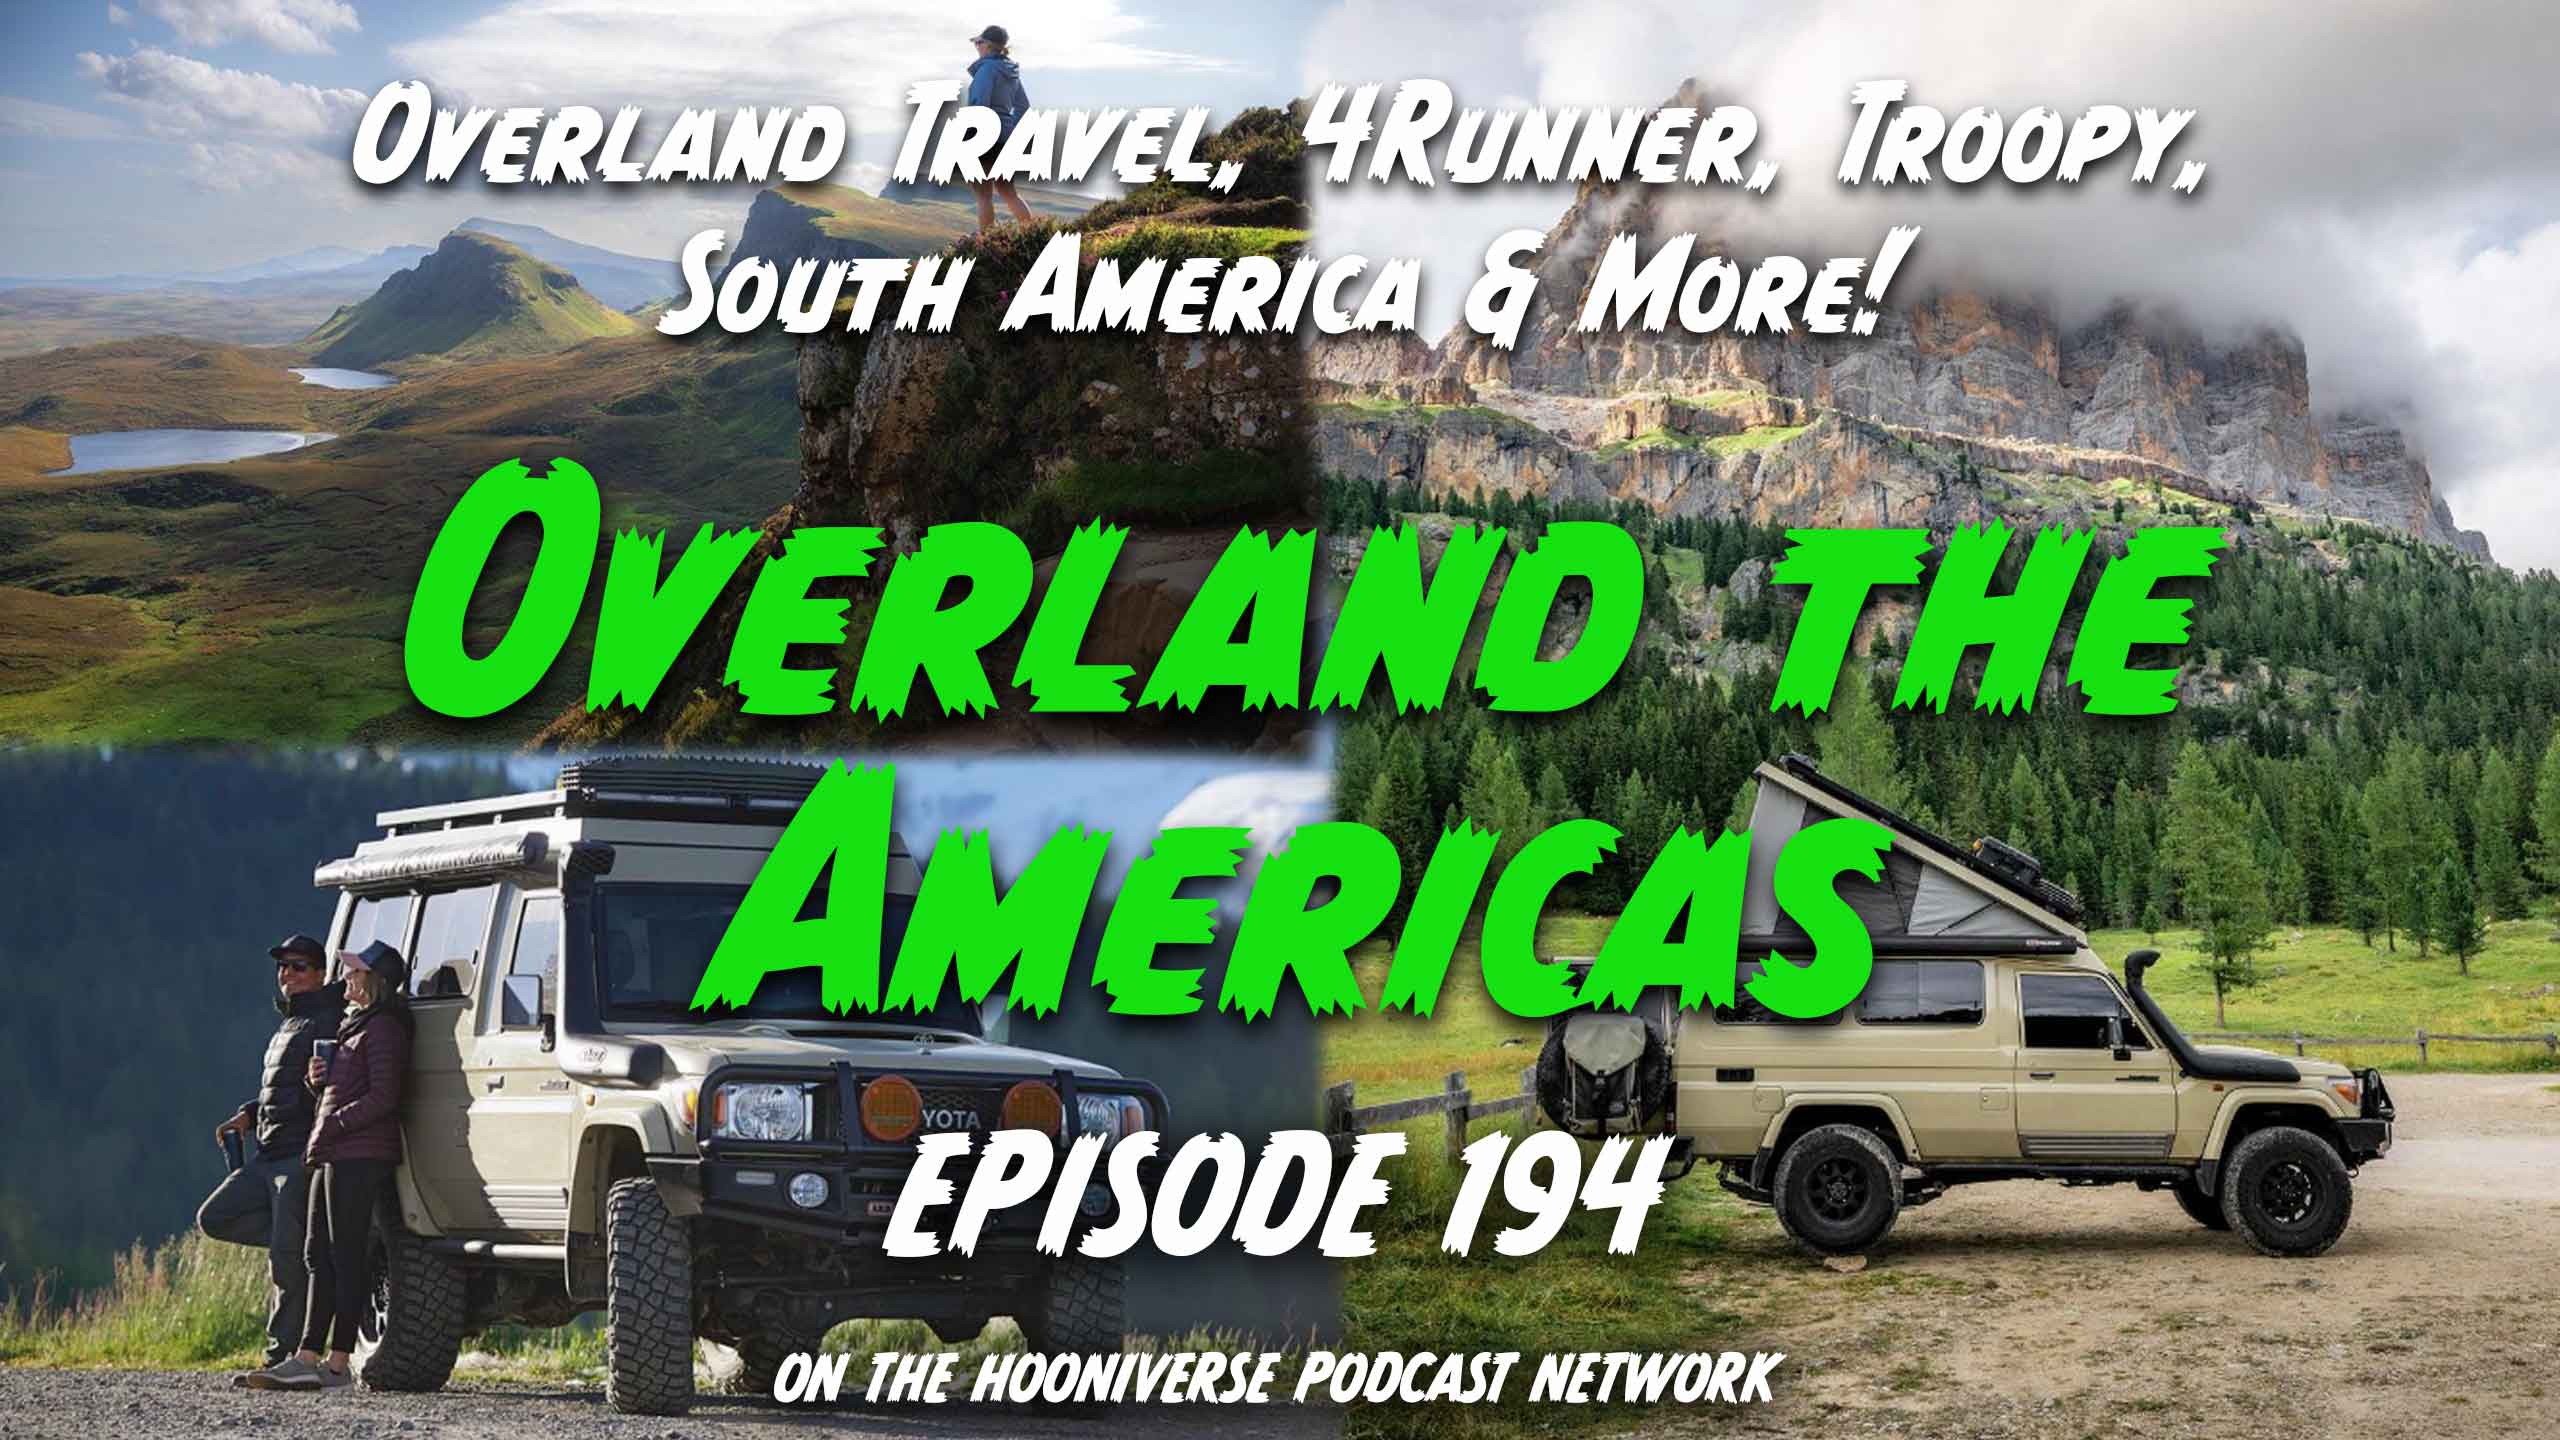 Overland the Americas, Land Cruiser Troopy, South America Overland Travel - Off The Road Again Podcast: Episode 194